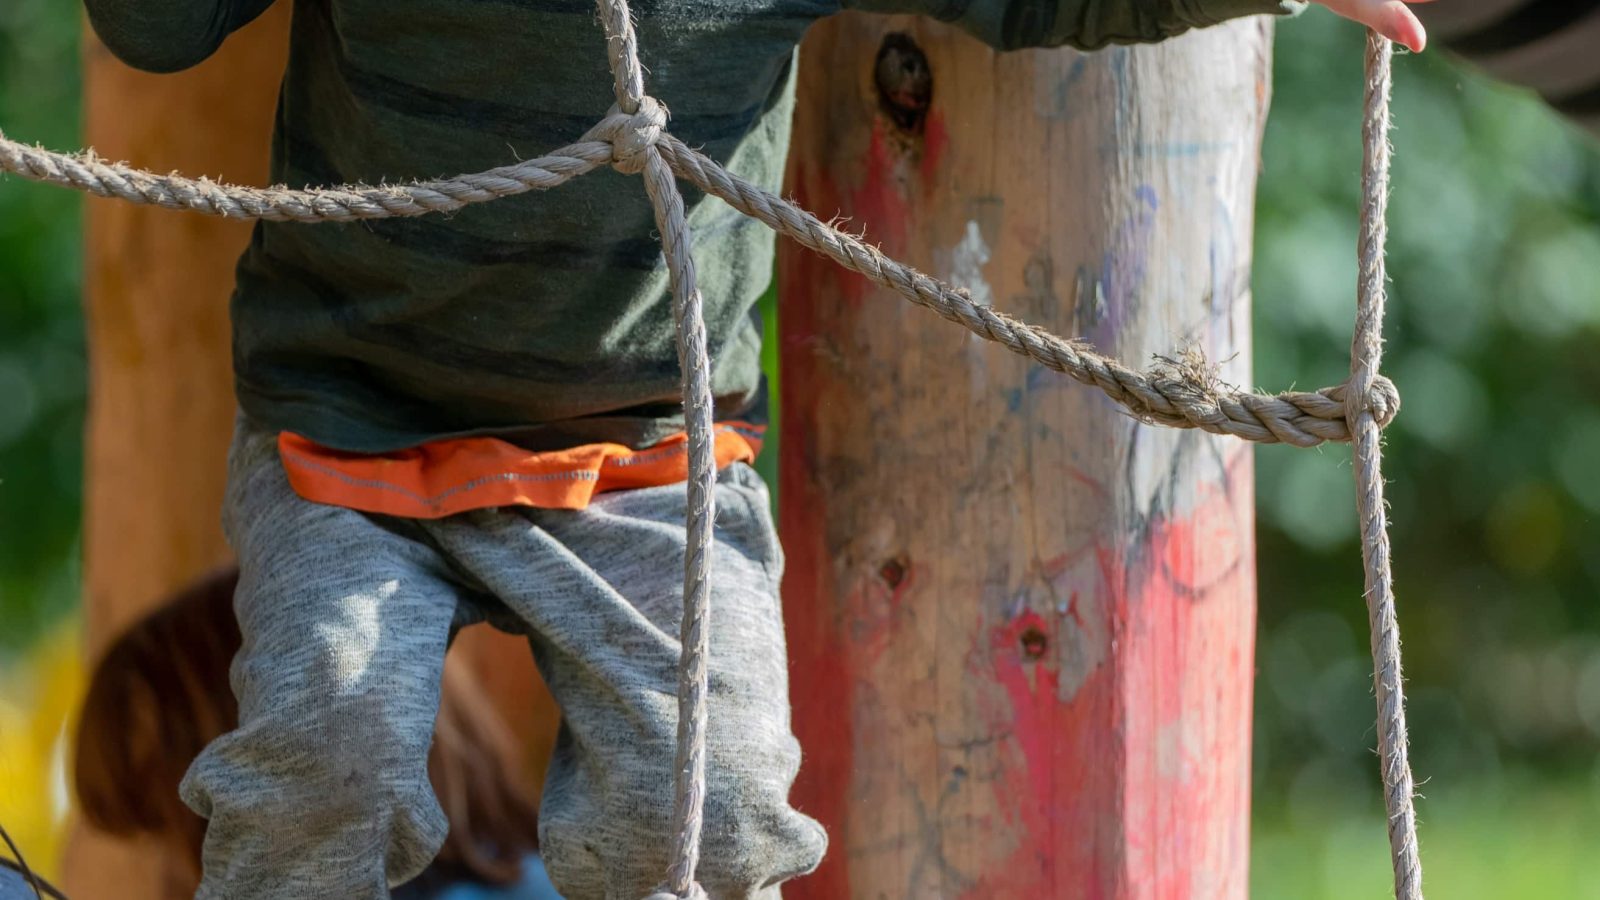 Close-up of a child in gray pants and a green shirt climbing a wooden structure with ropes at an outdoor playground, focusing on the detail and texture of the ropes and wood for a brand strategy portfolio.